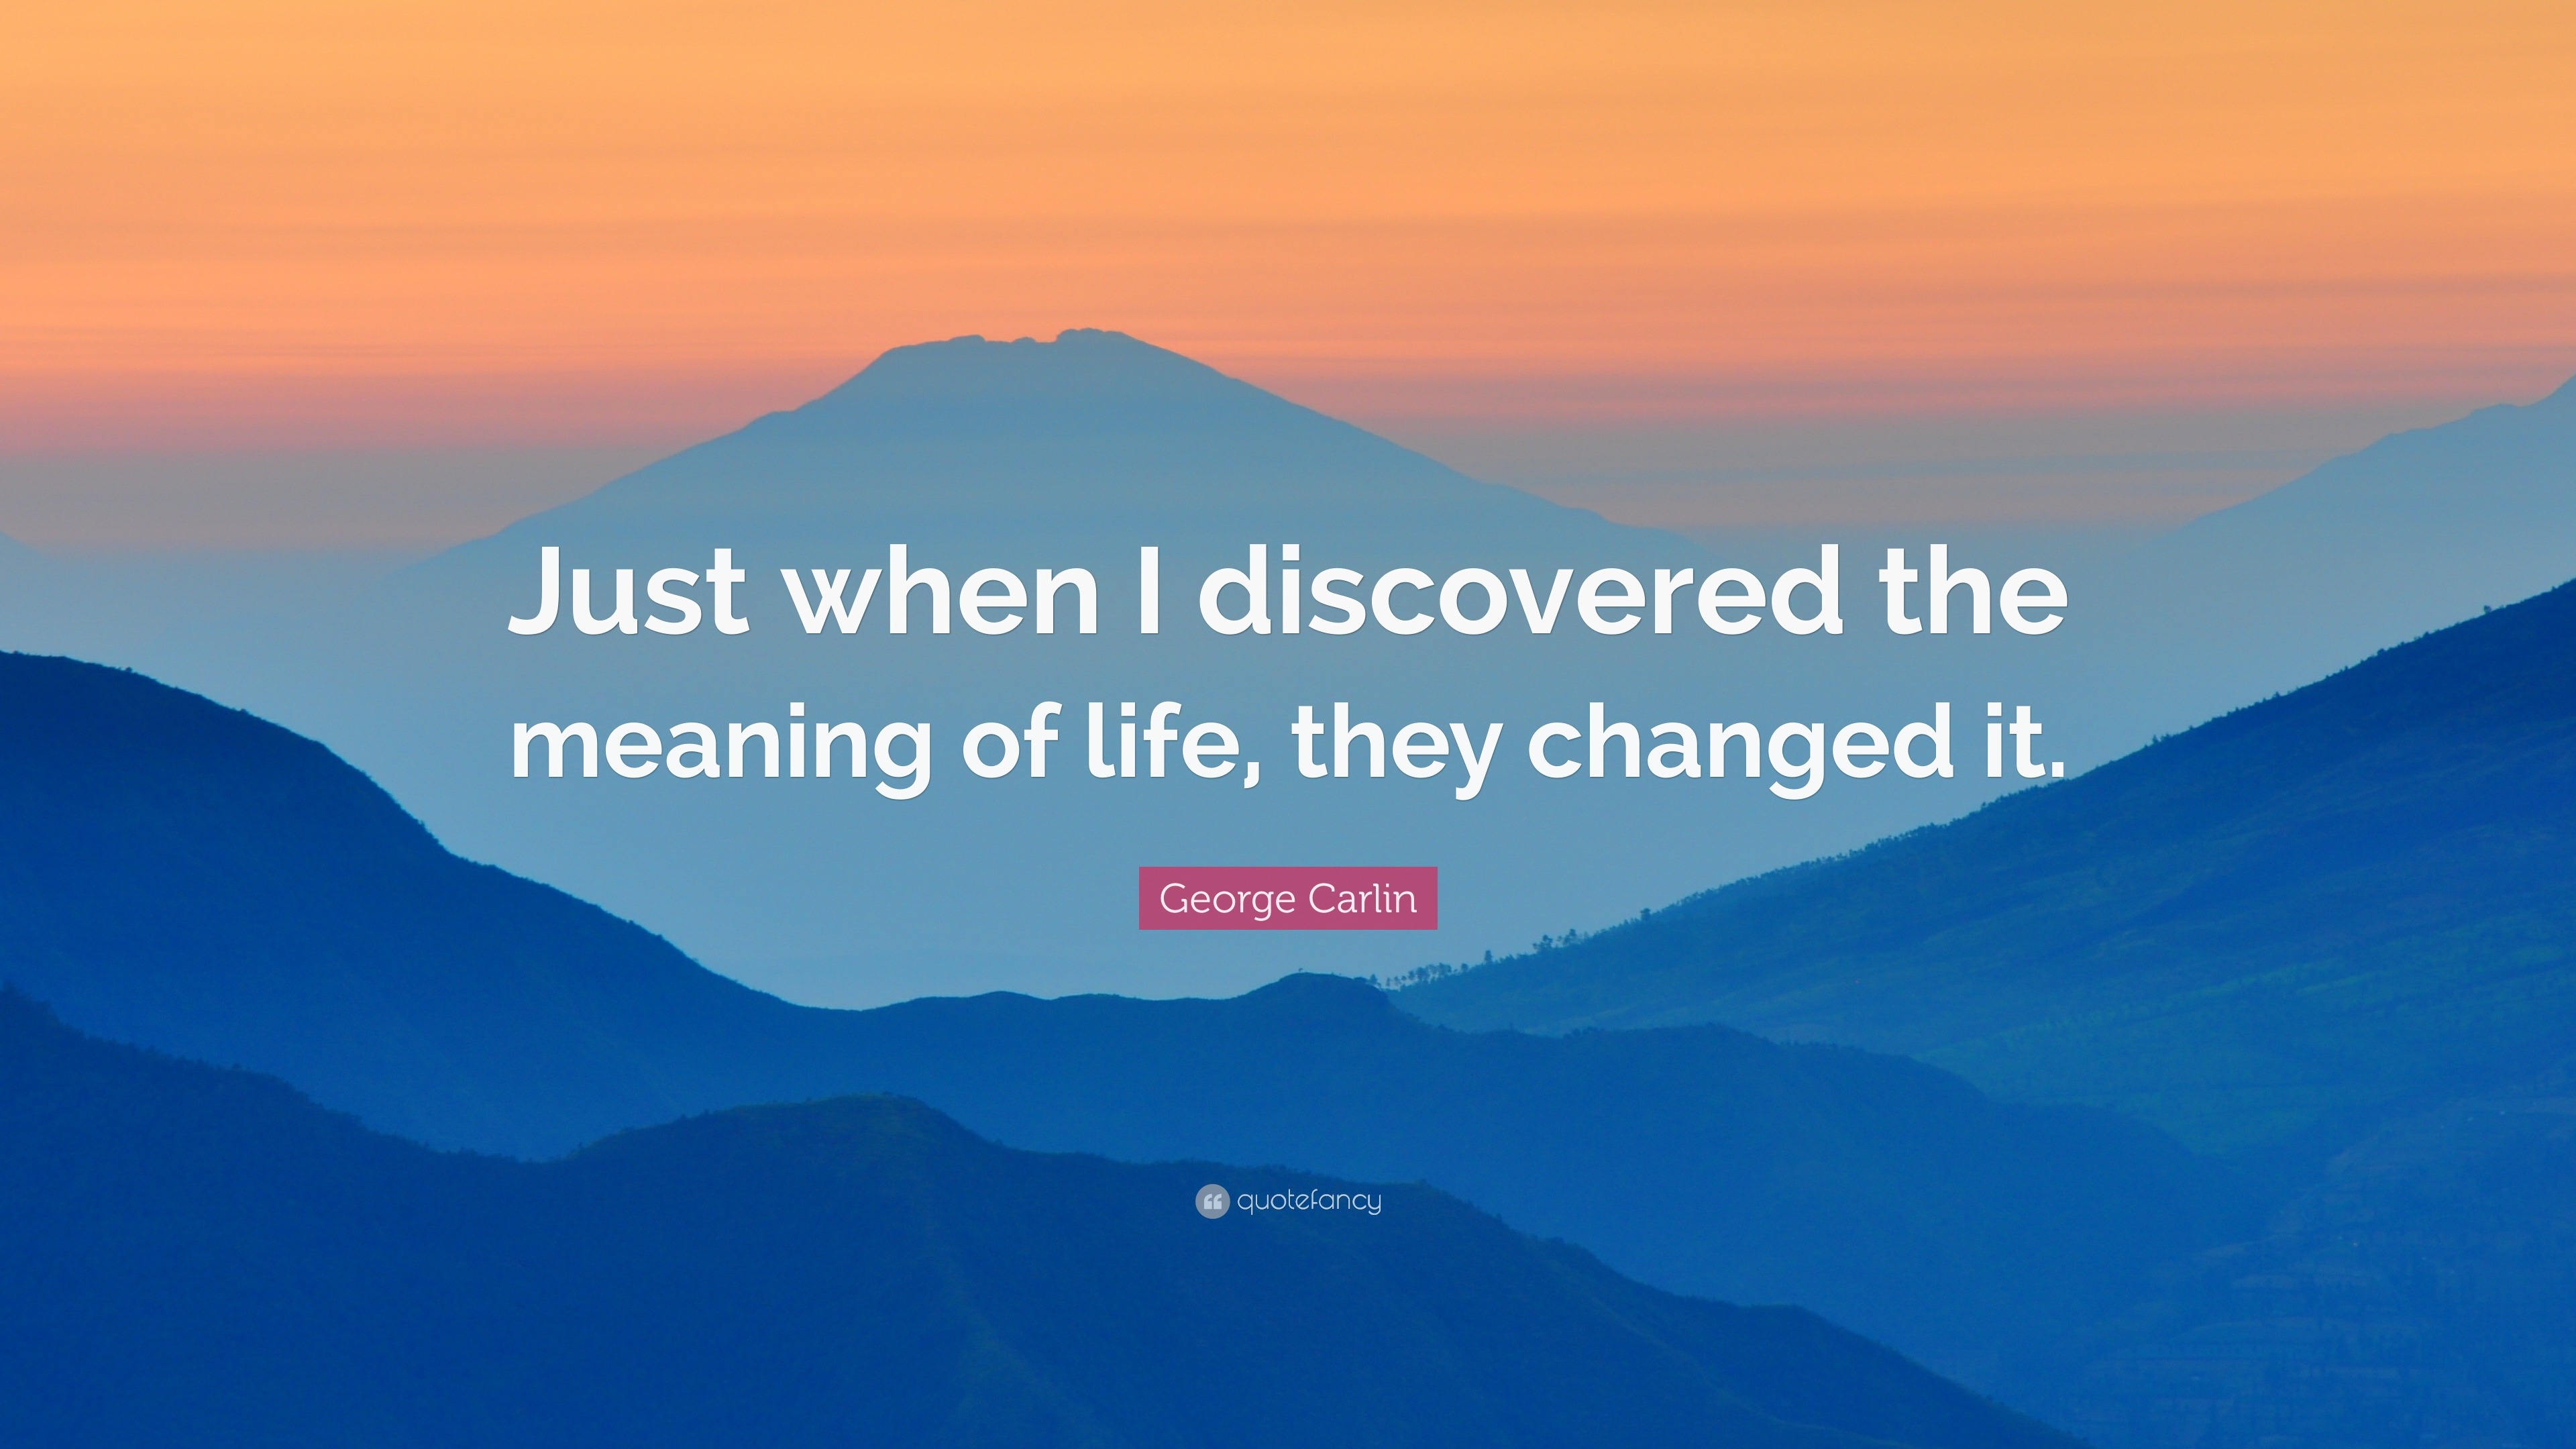 George Carlin Quote: “Just when I discovered the meaning of life, they  changed it.”